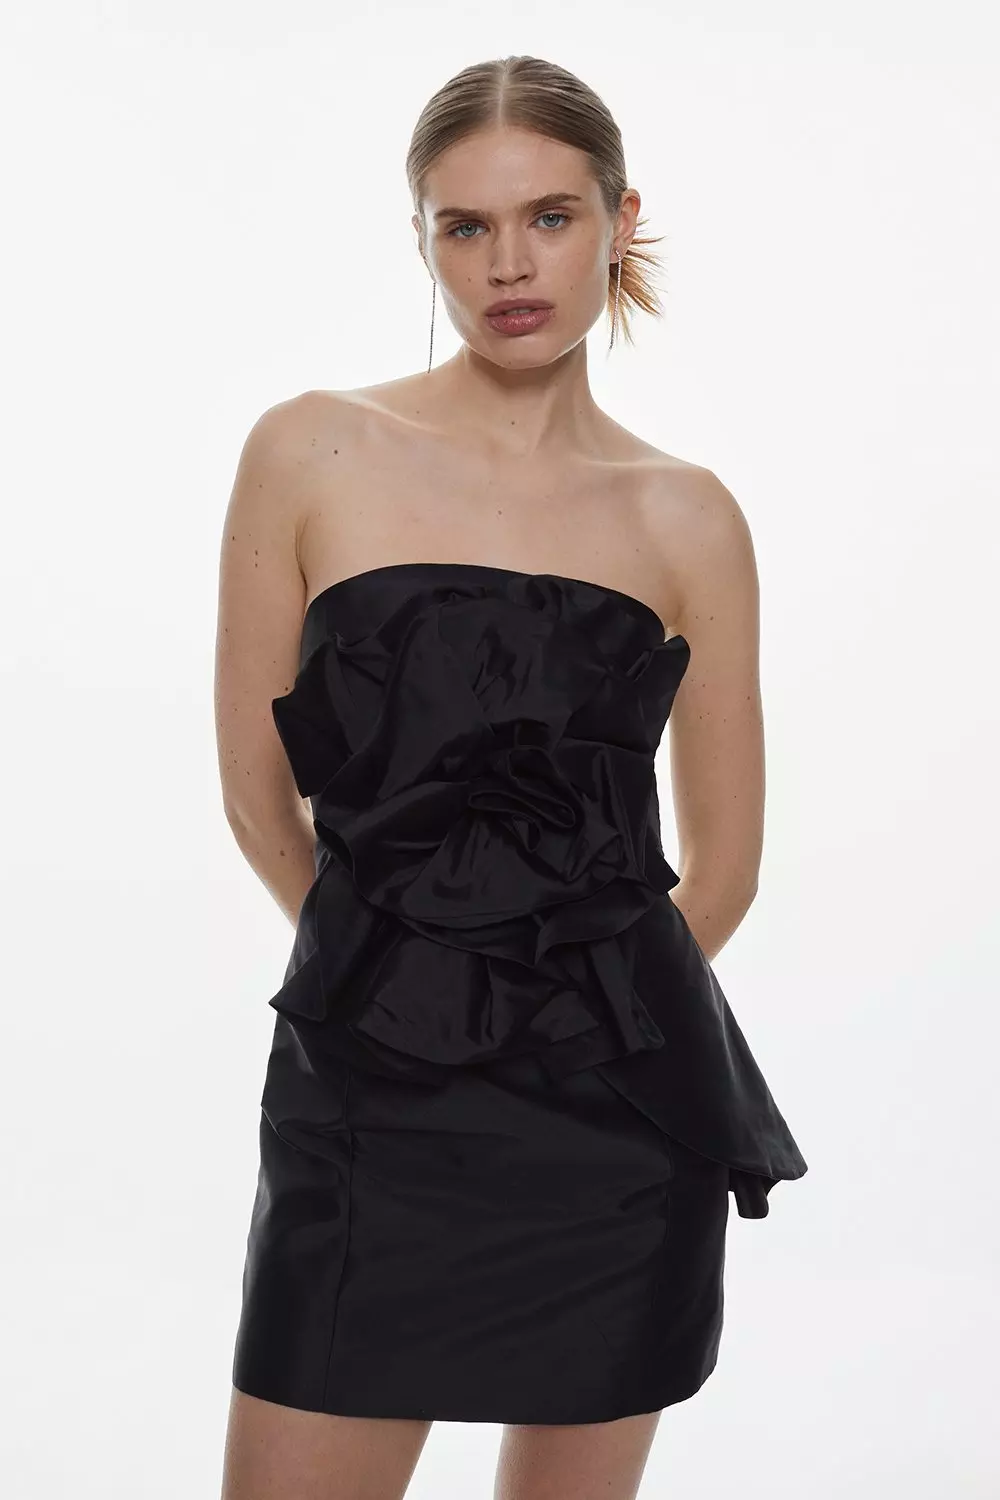 SHEER Combines Shapewear to Redefine the Little Black Dress